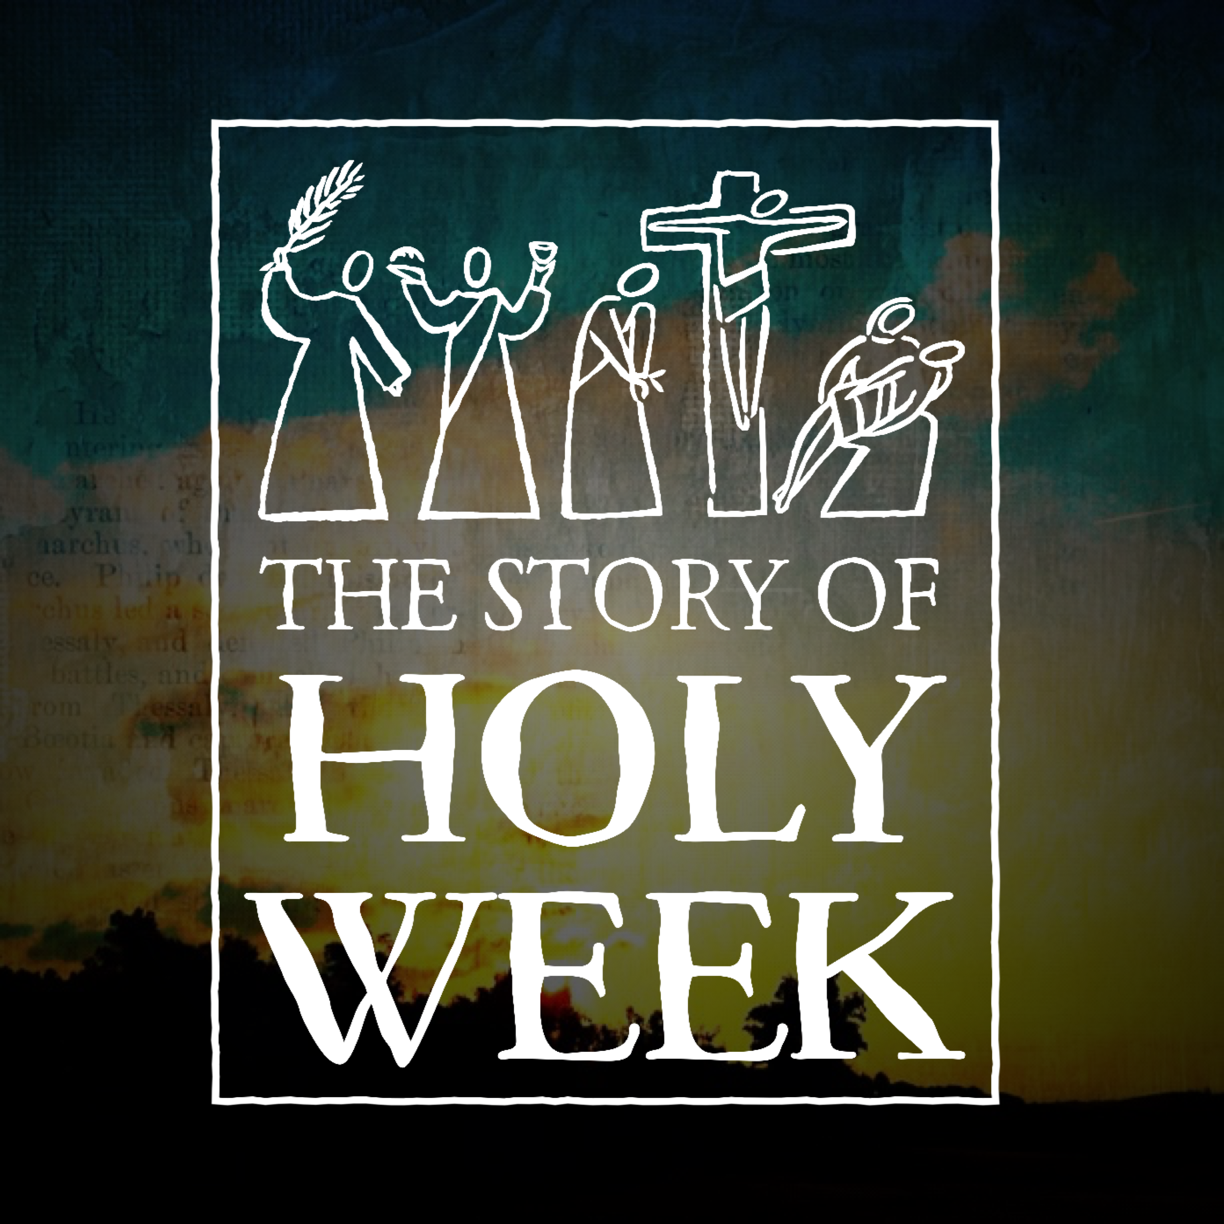 The Story of Holy Week